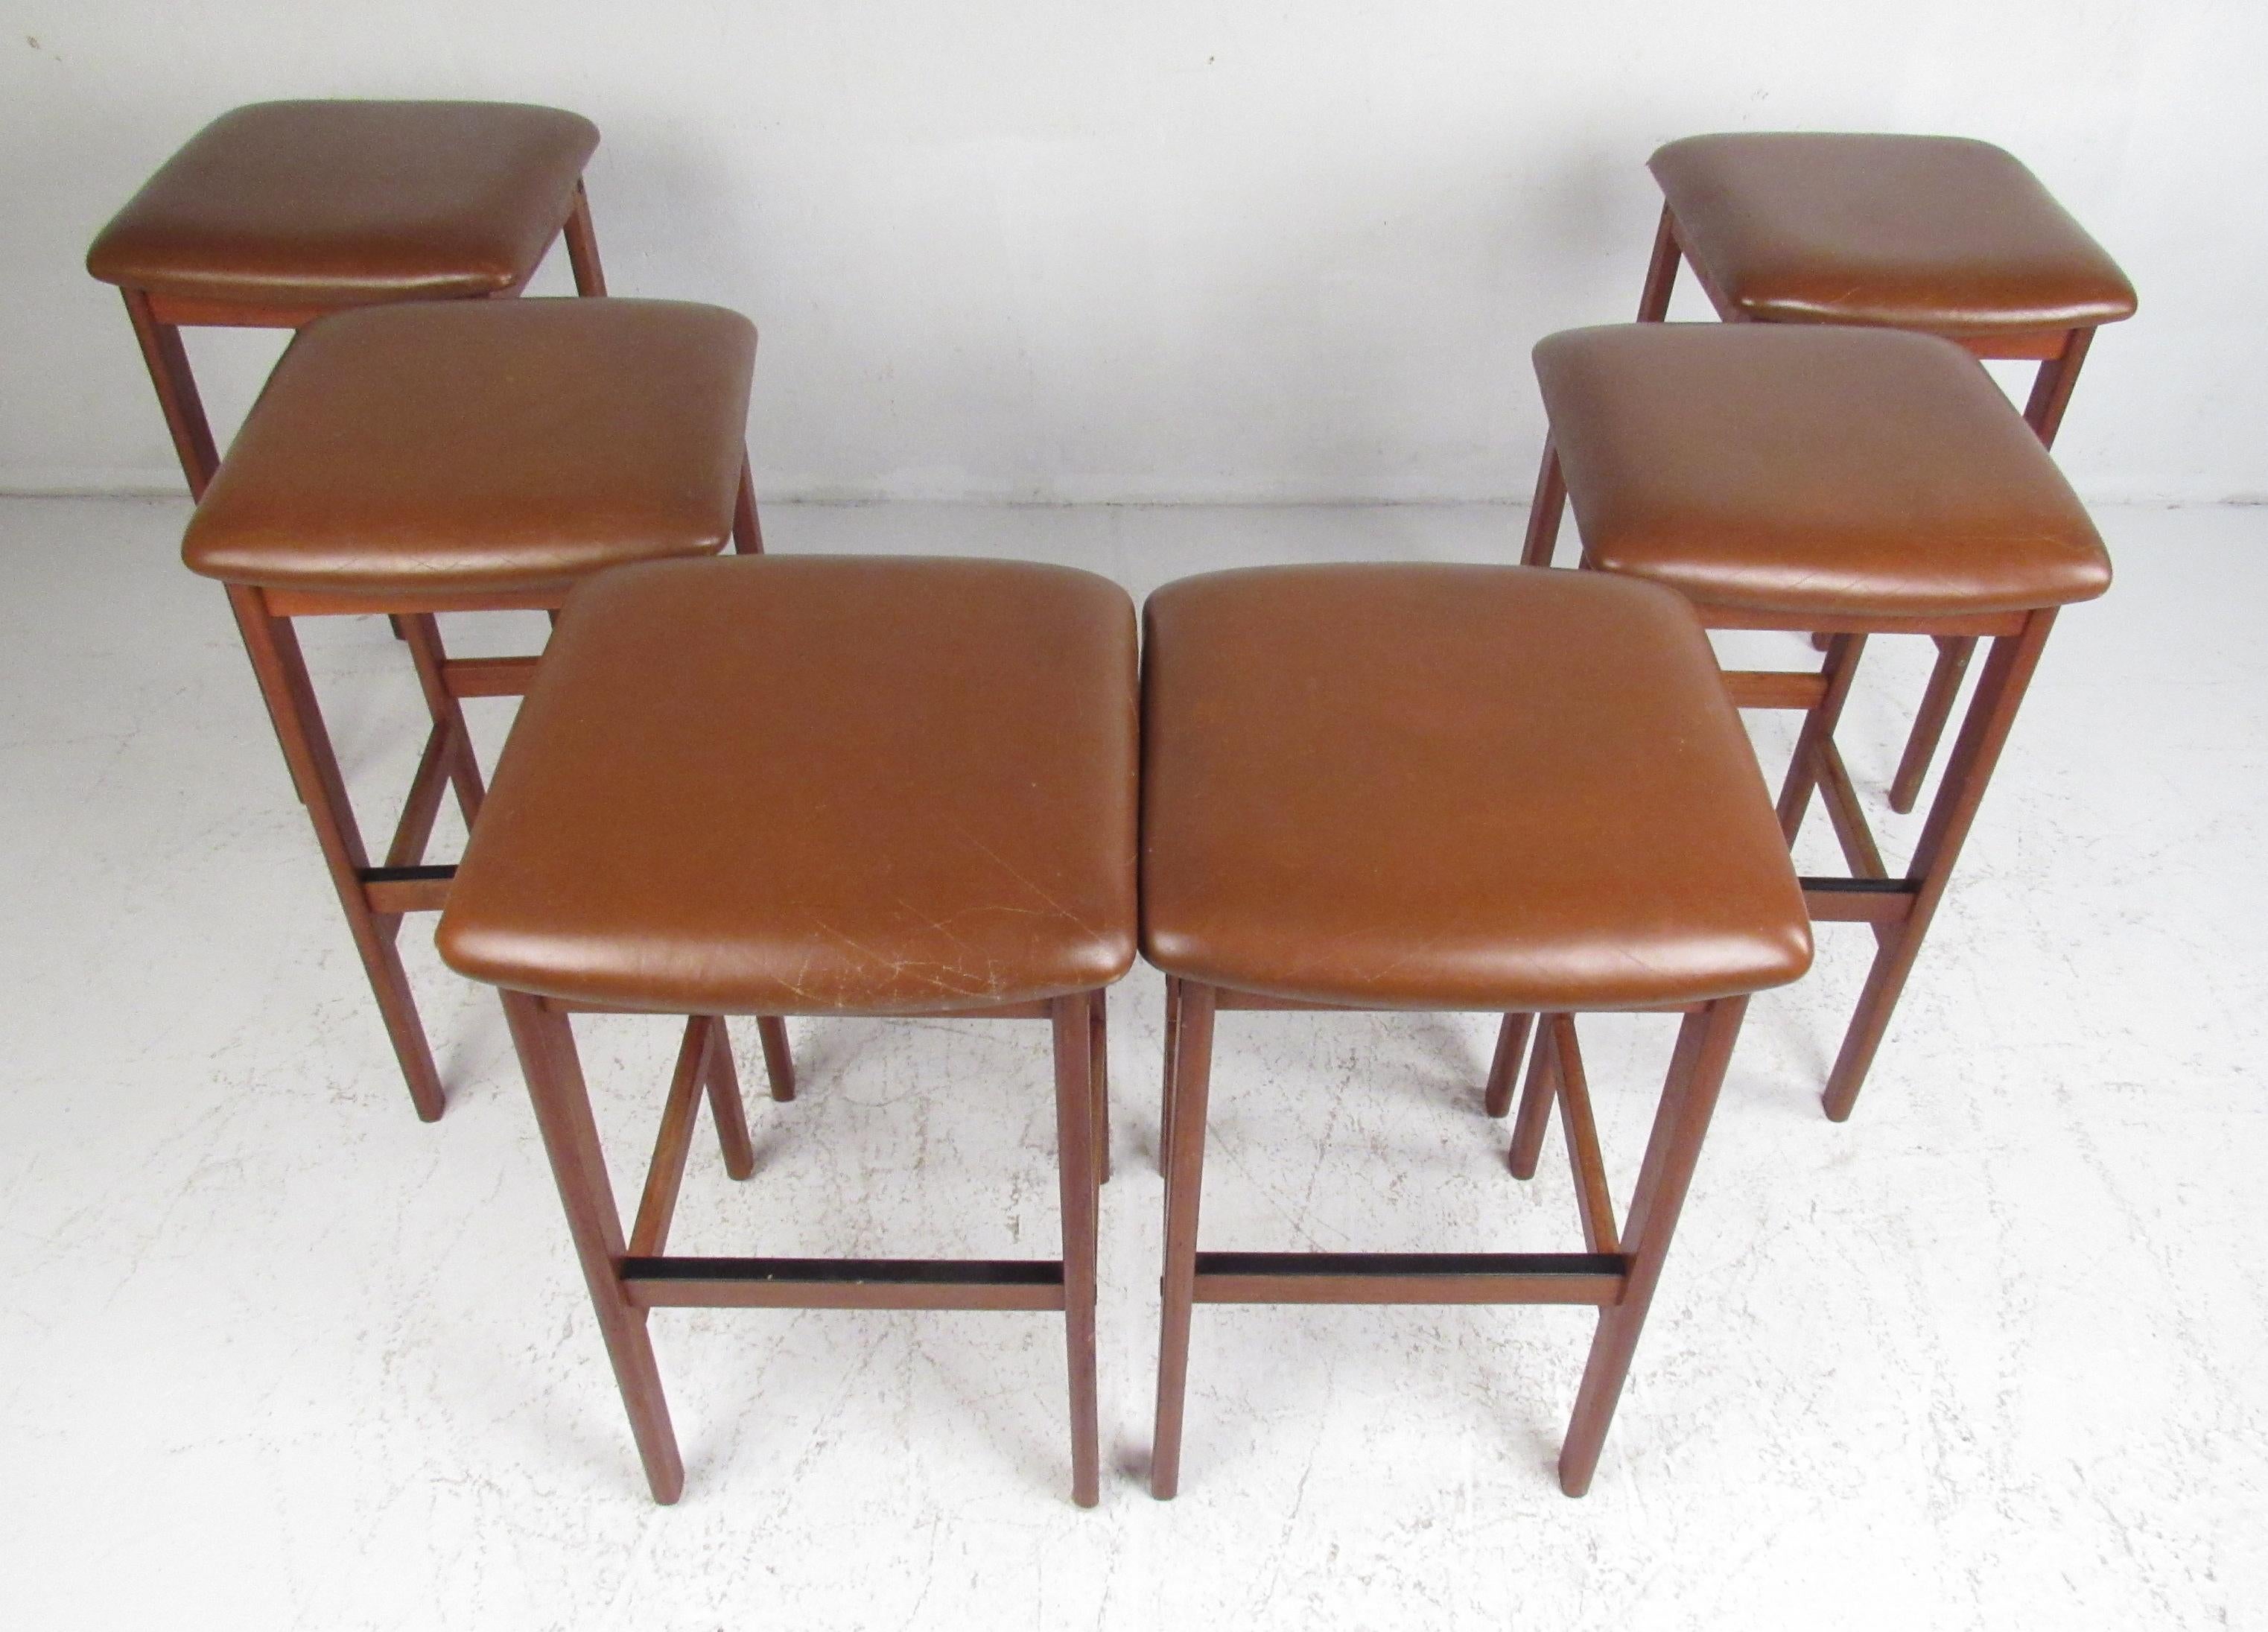 Set of six Scandinavian Modern teak frame and leather seat stools by Korup Stolefabrik. 
The price noted is per stool.
Please confirm item location (NY or NJ) with dealer.